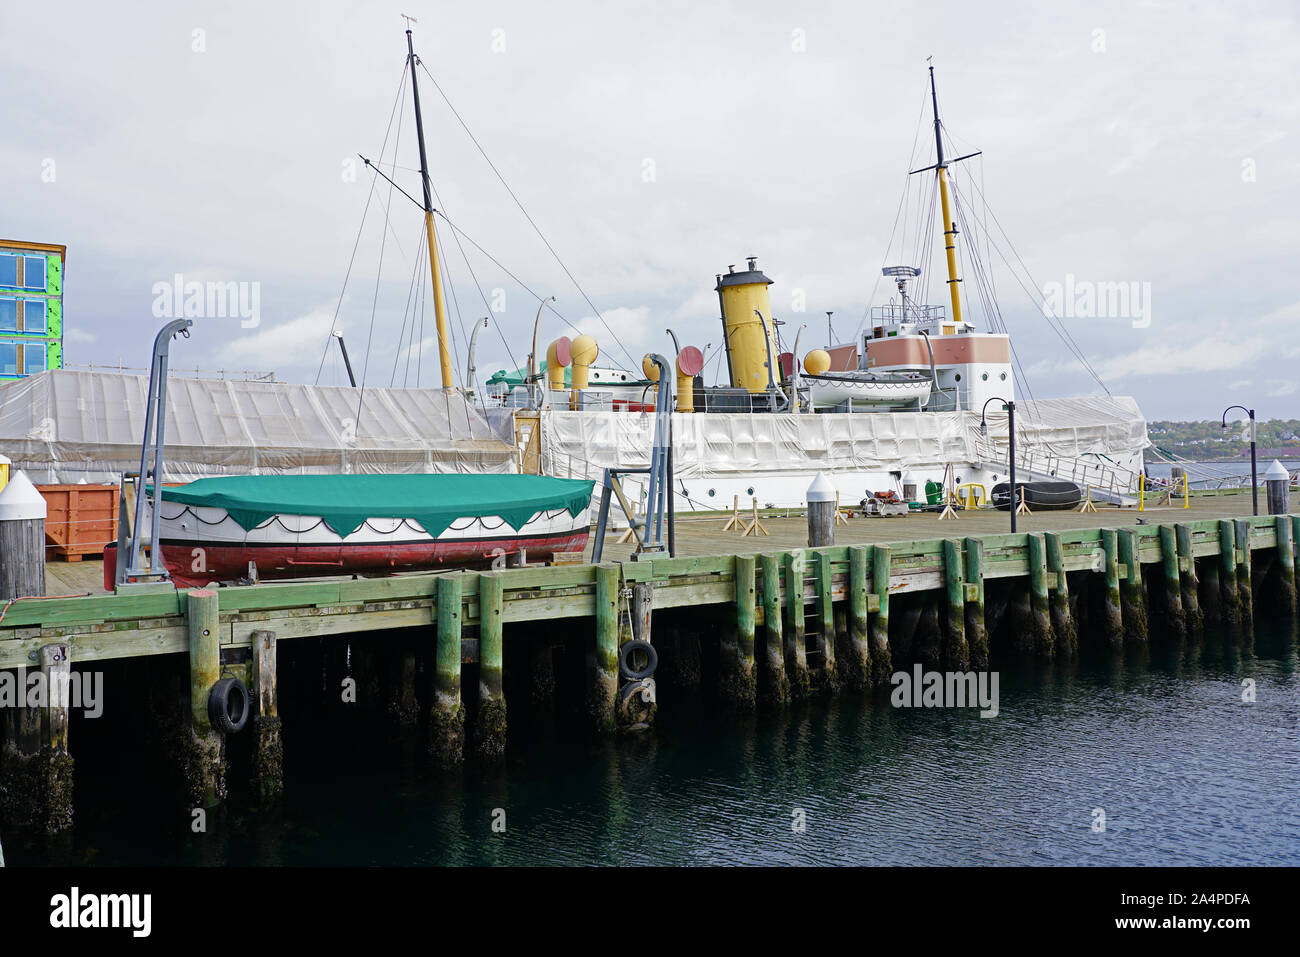 HALIFAX, NOVA SCOTIA -7 OCT 2019- View of the Maritime Museum of the Atlantic on Lower Water Street on the seaport waterfront in Halifax, Nova Scotia, Stock Photo